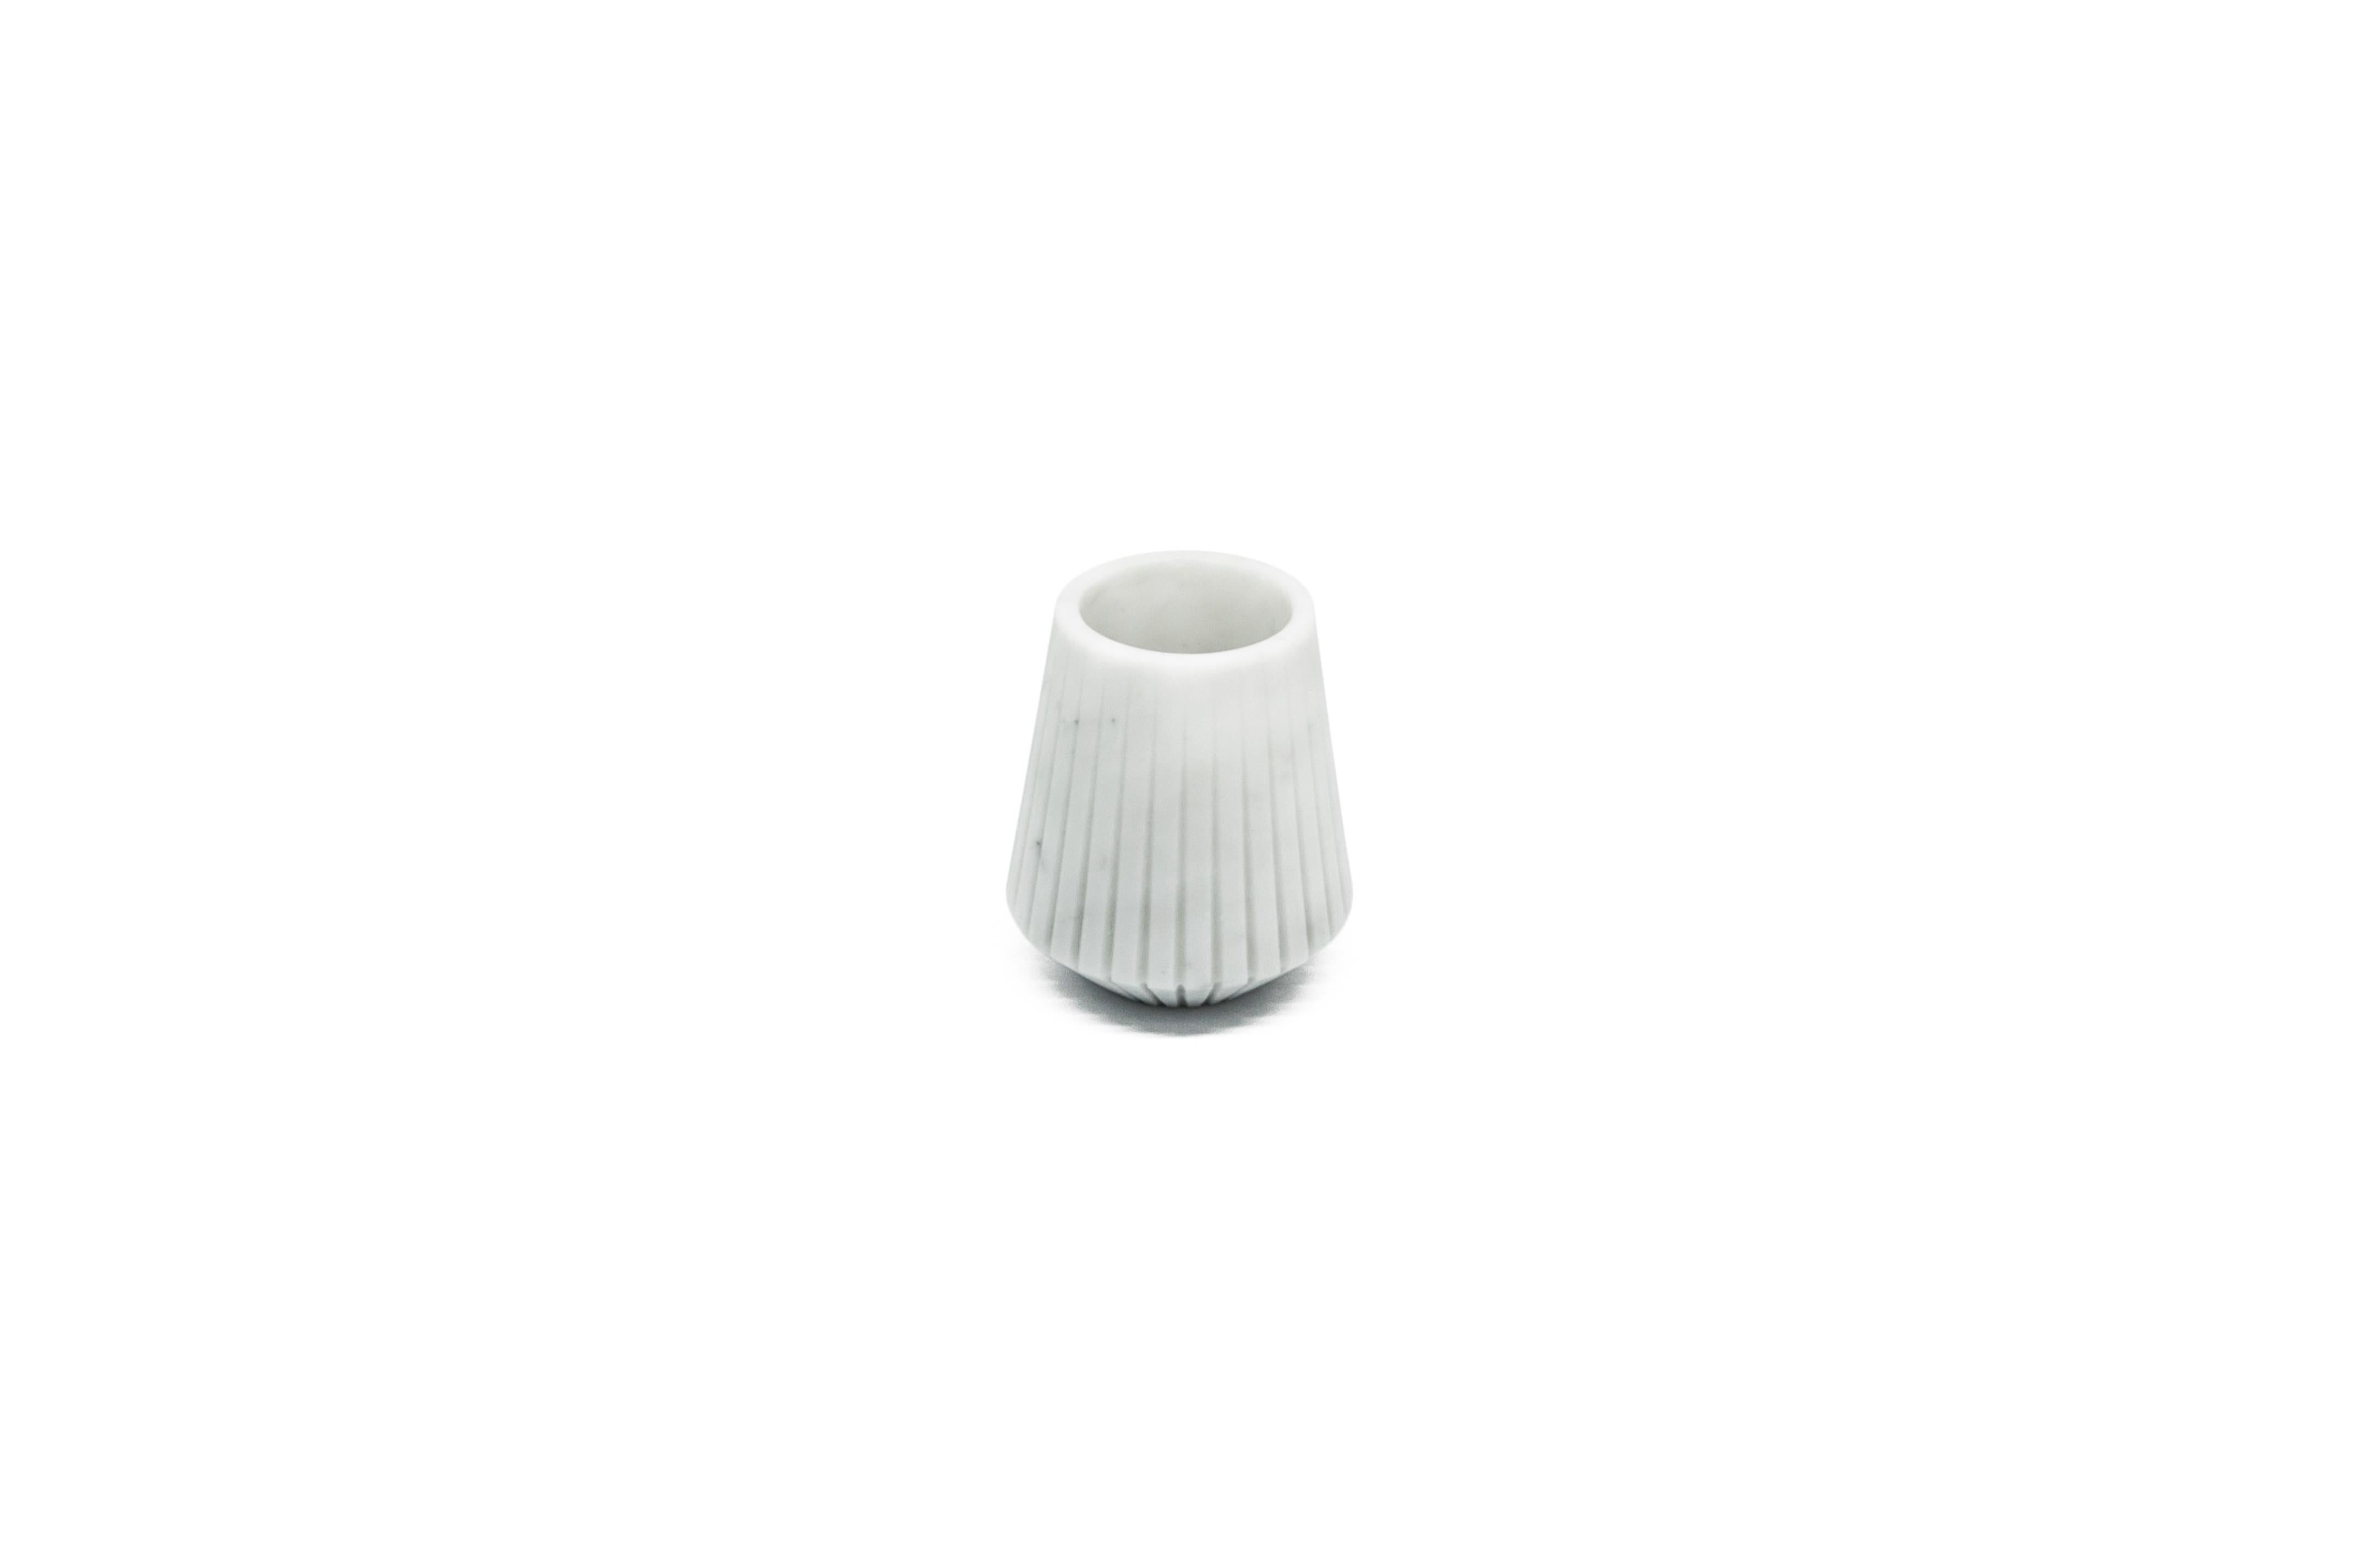 Short striped vase in white Carrara marble.
-Jacopo Simonetti design for FiammettaV-
Each piece is in a way unique (every marble block is different in veins and shades) and handmade by Italian artisans specialized over generations in processing